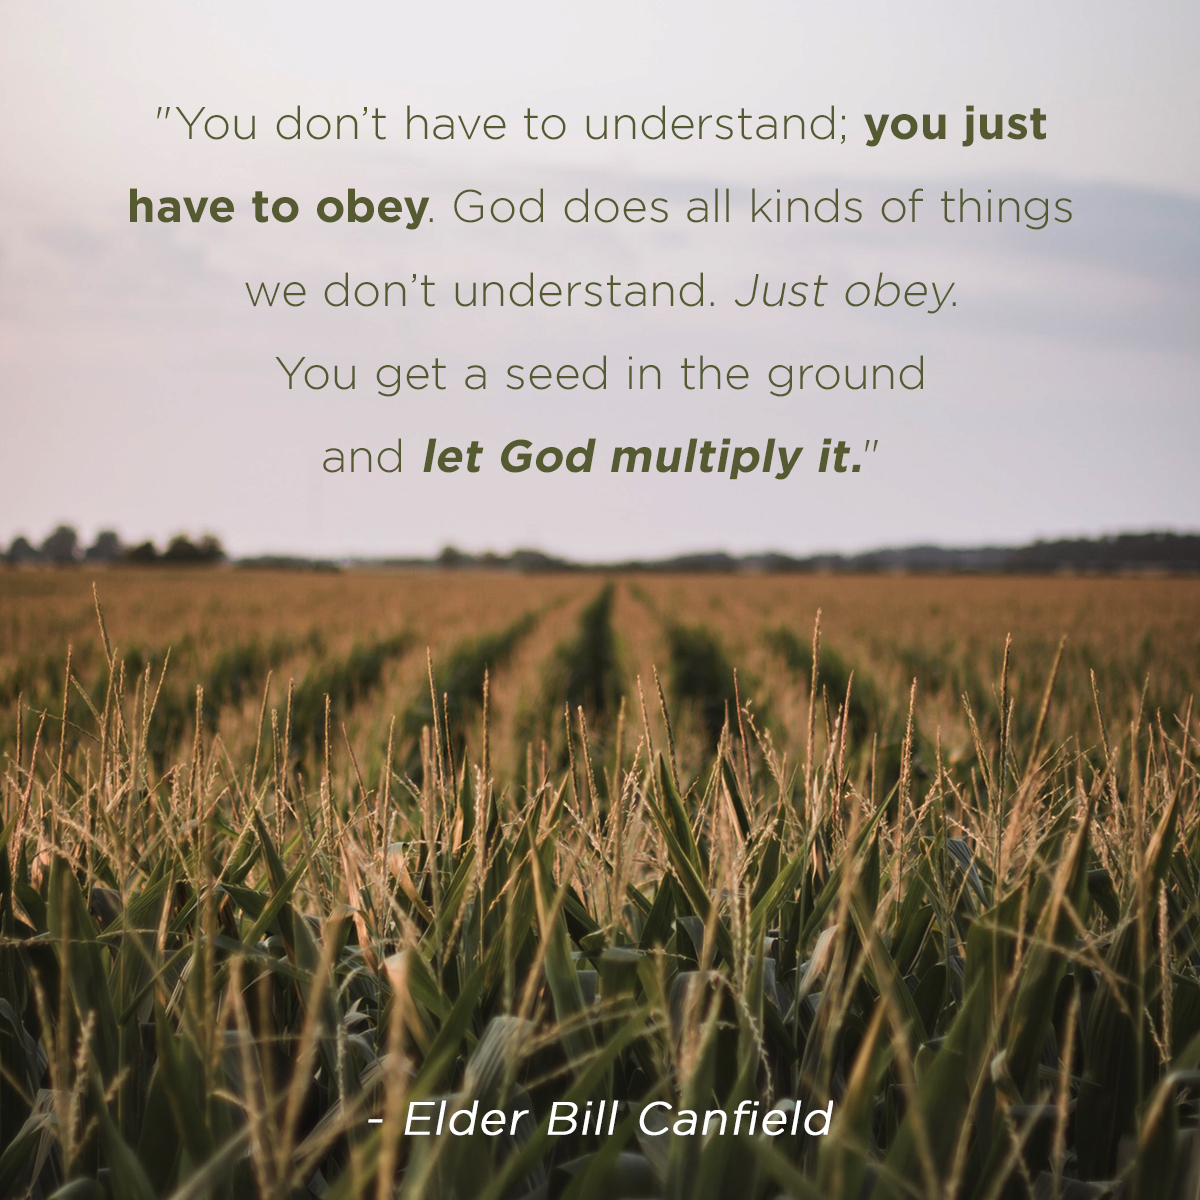 “You don’t have to understand, you just have to obey. God does all kinds of things we don’t understand. Just obey. You get a seed in the ground and let God multiply it.” – Elder Bill Canfield